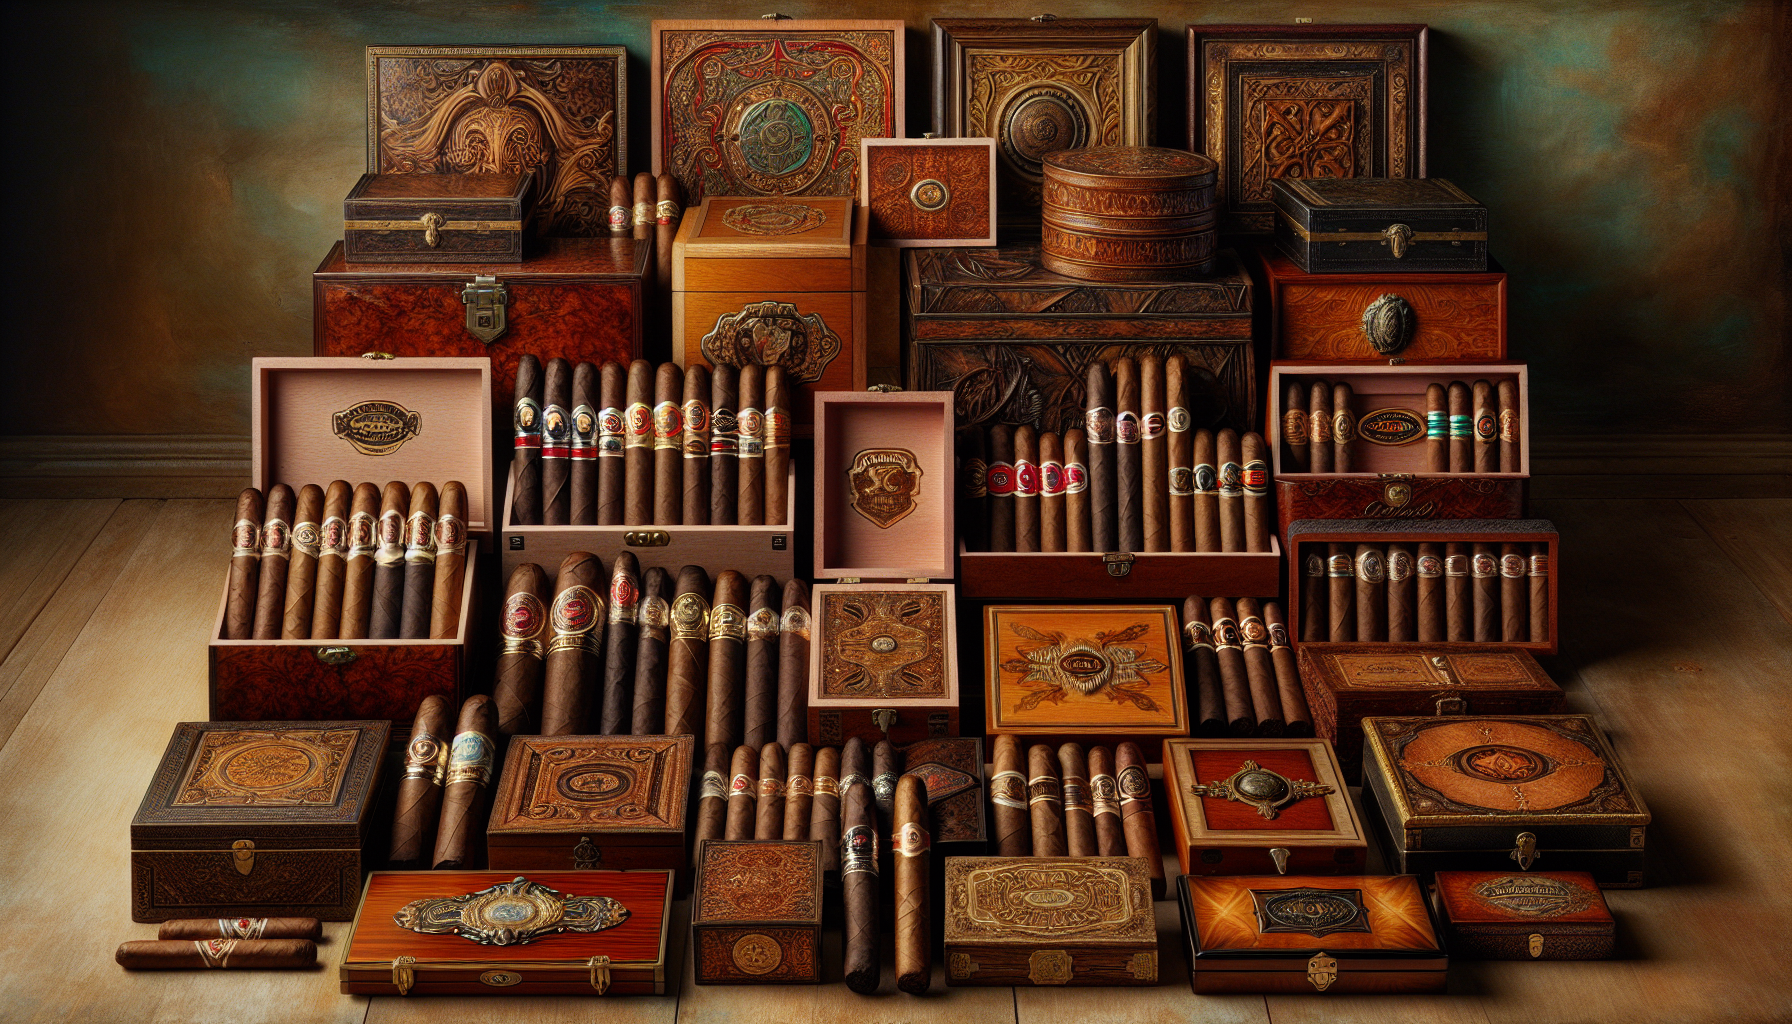 Artistic depiction of various cigar packaging designs and styles